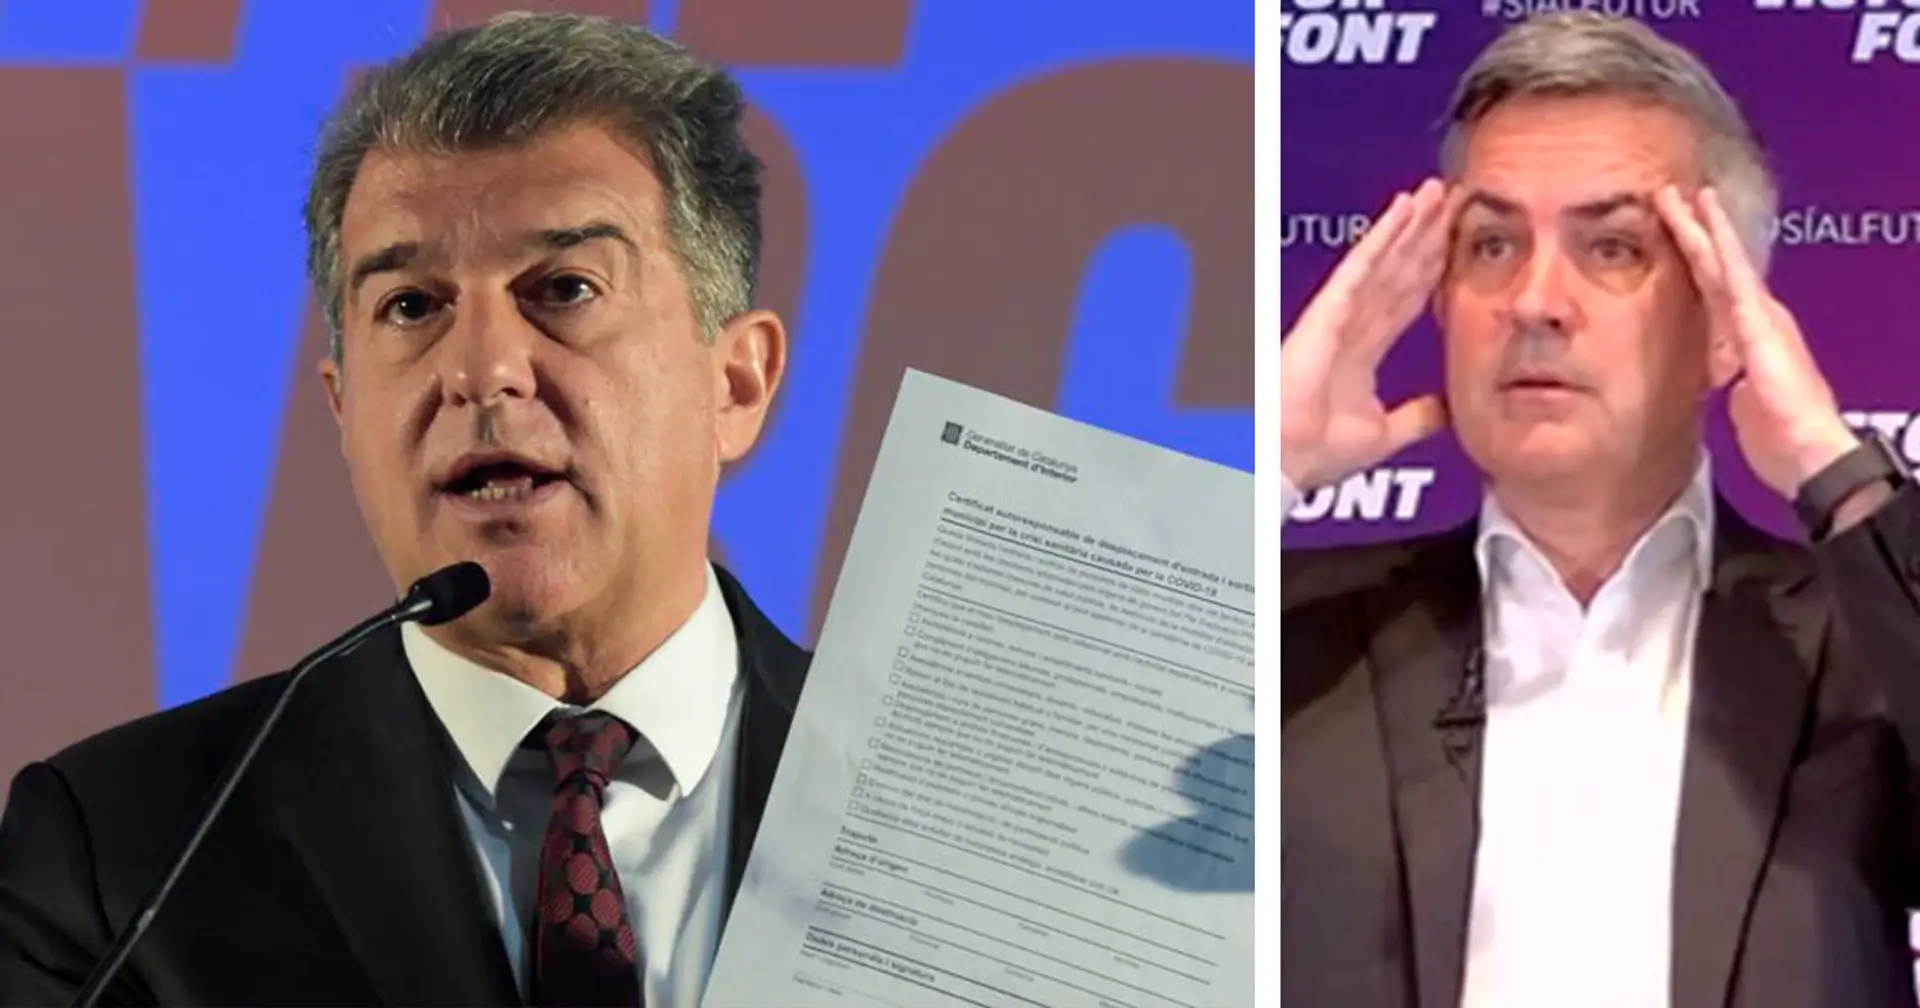 'Laporta hasn't explained how he will lead his project. He hasn't said anything': Victor Font